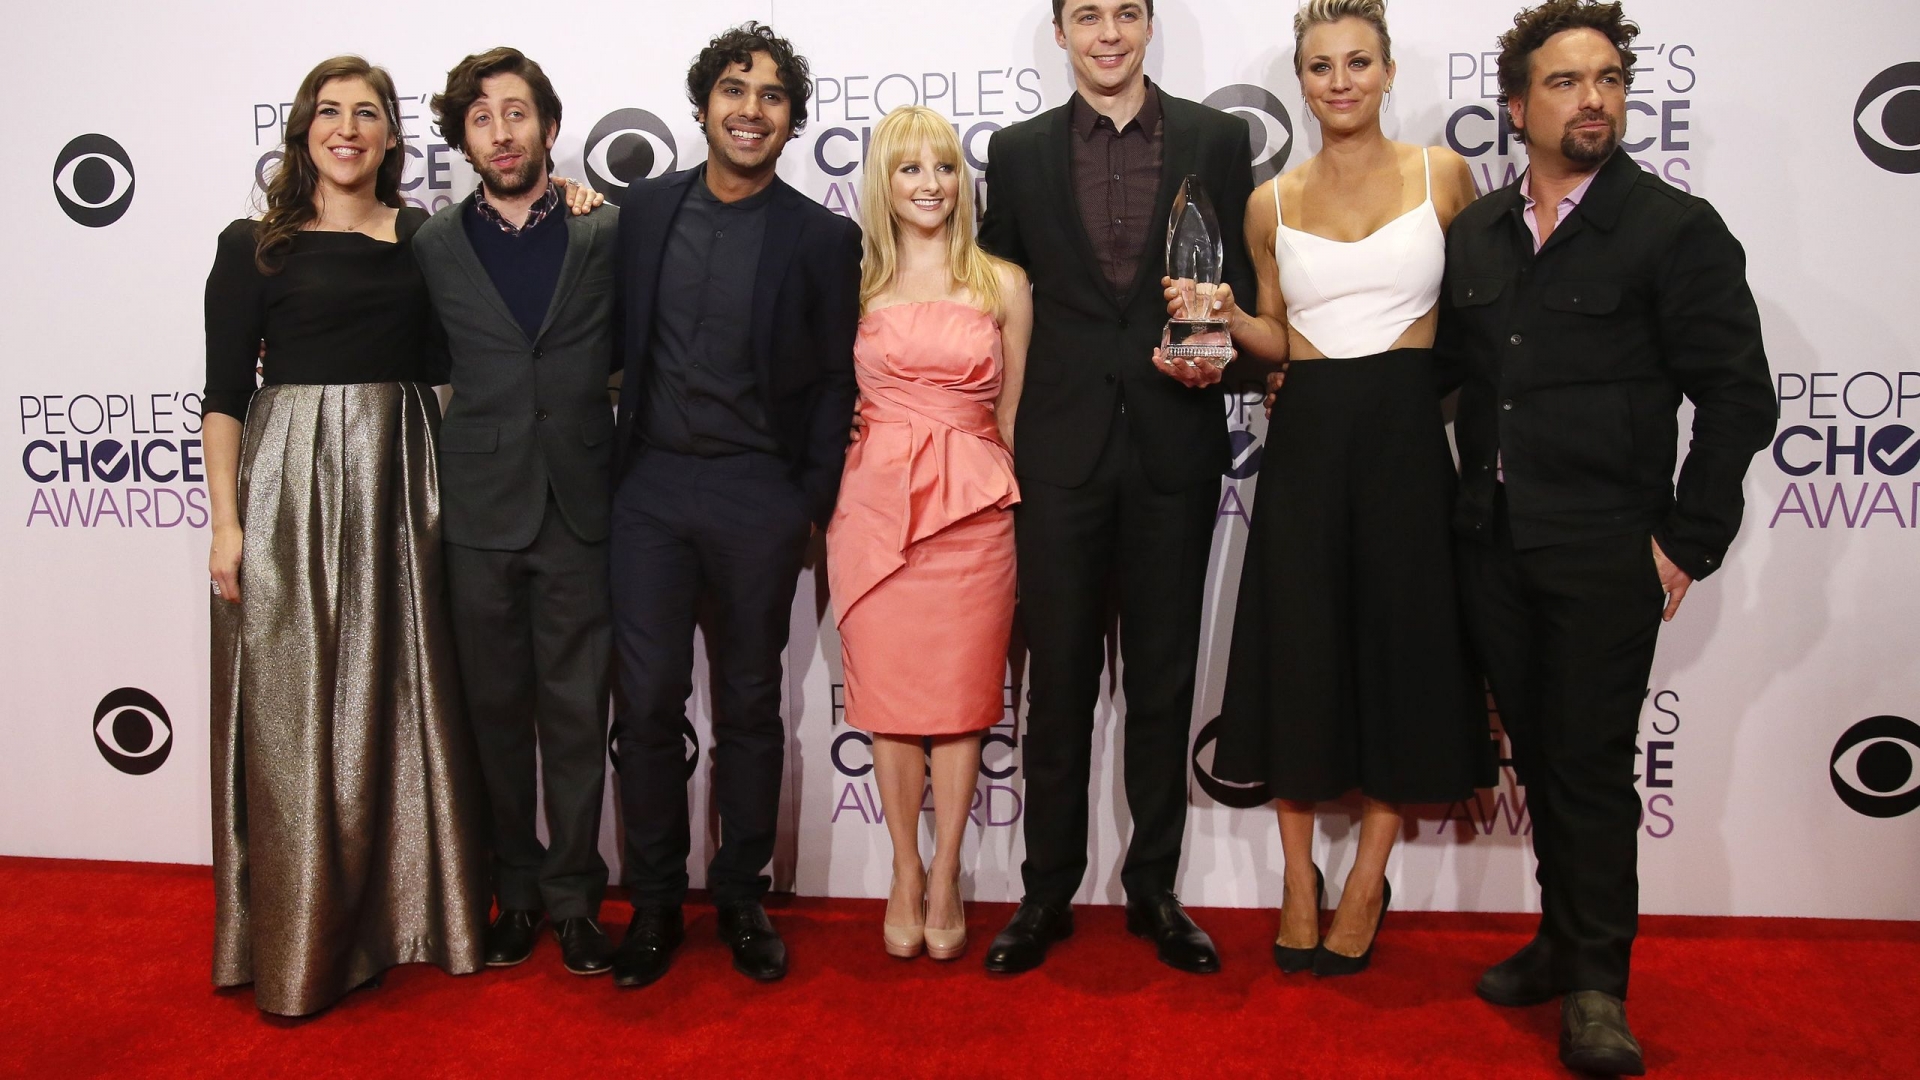 The Big Bang Theory Peoples Choice Awards for 1920 x 1080 HDTV 1080p resolution